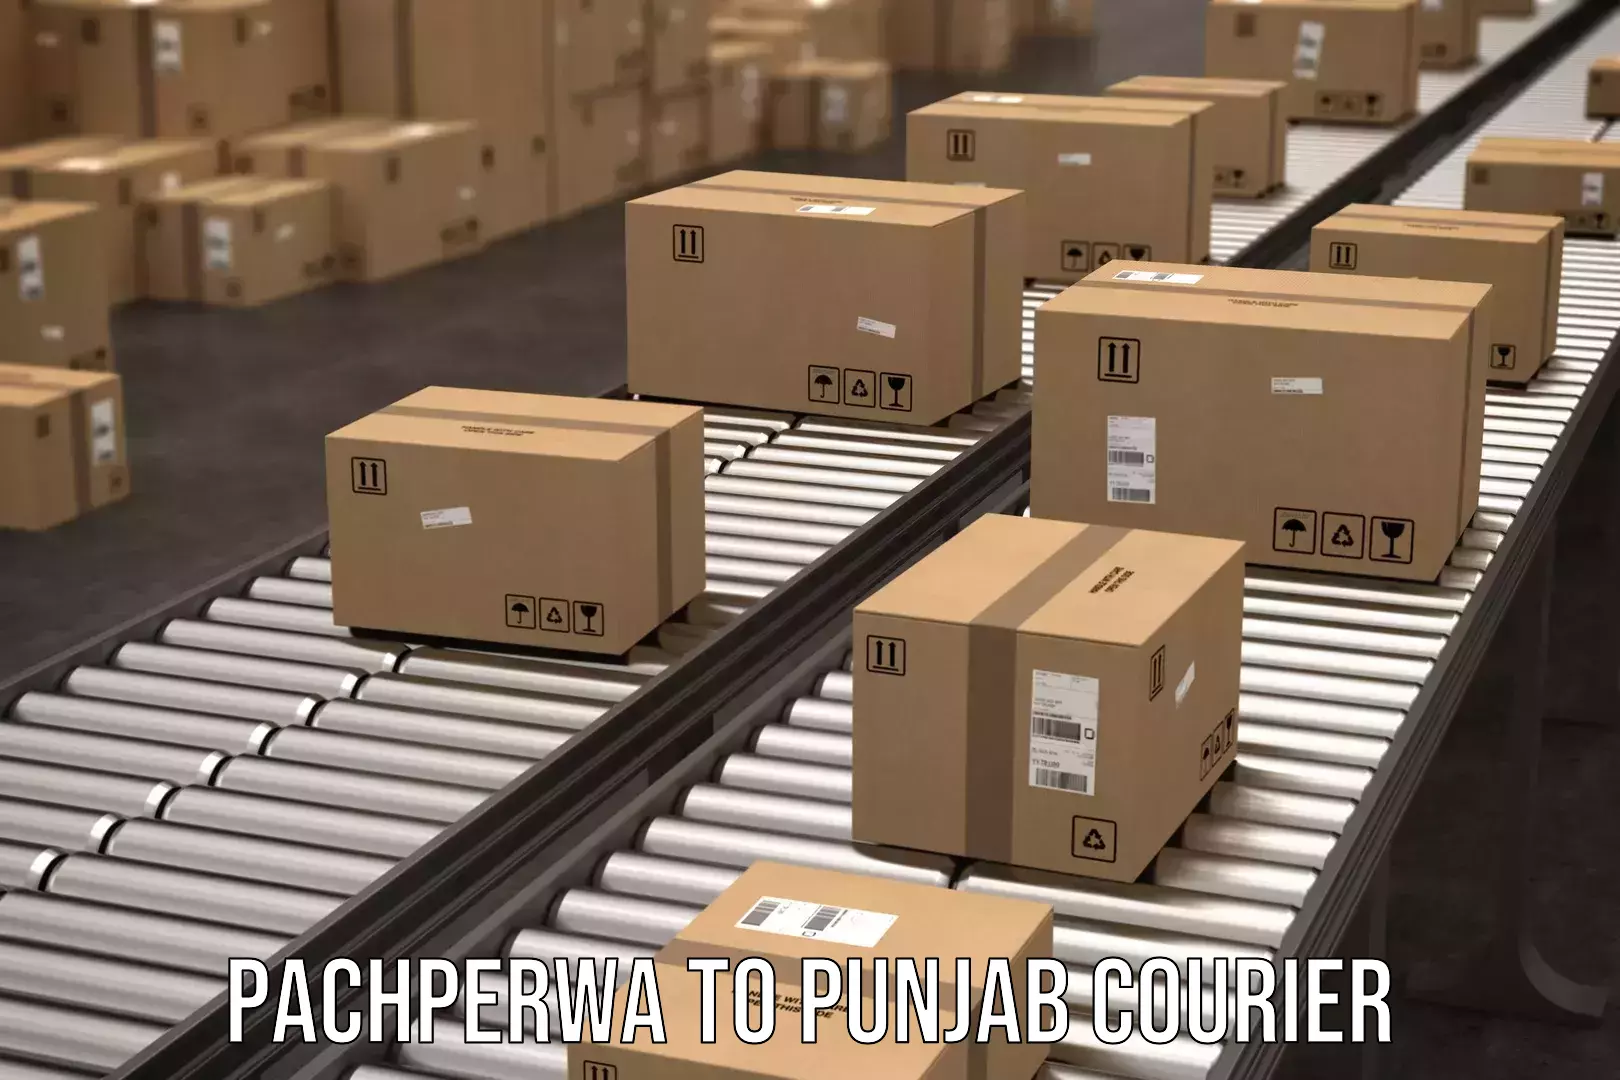 Same-day delivery options Pachperwa to Punjab